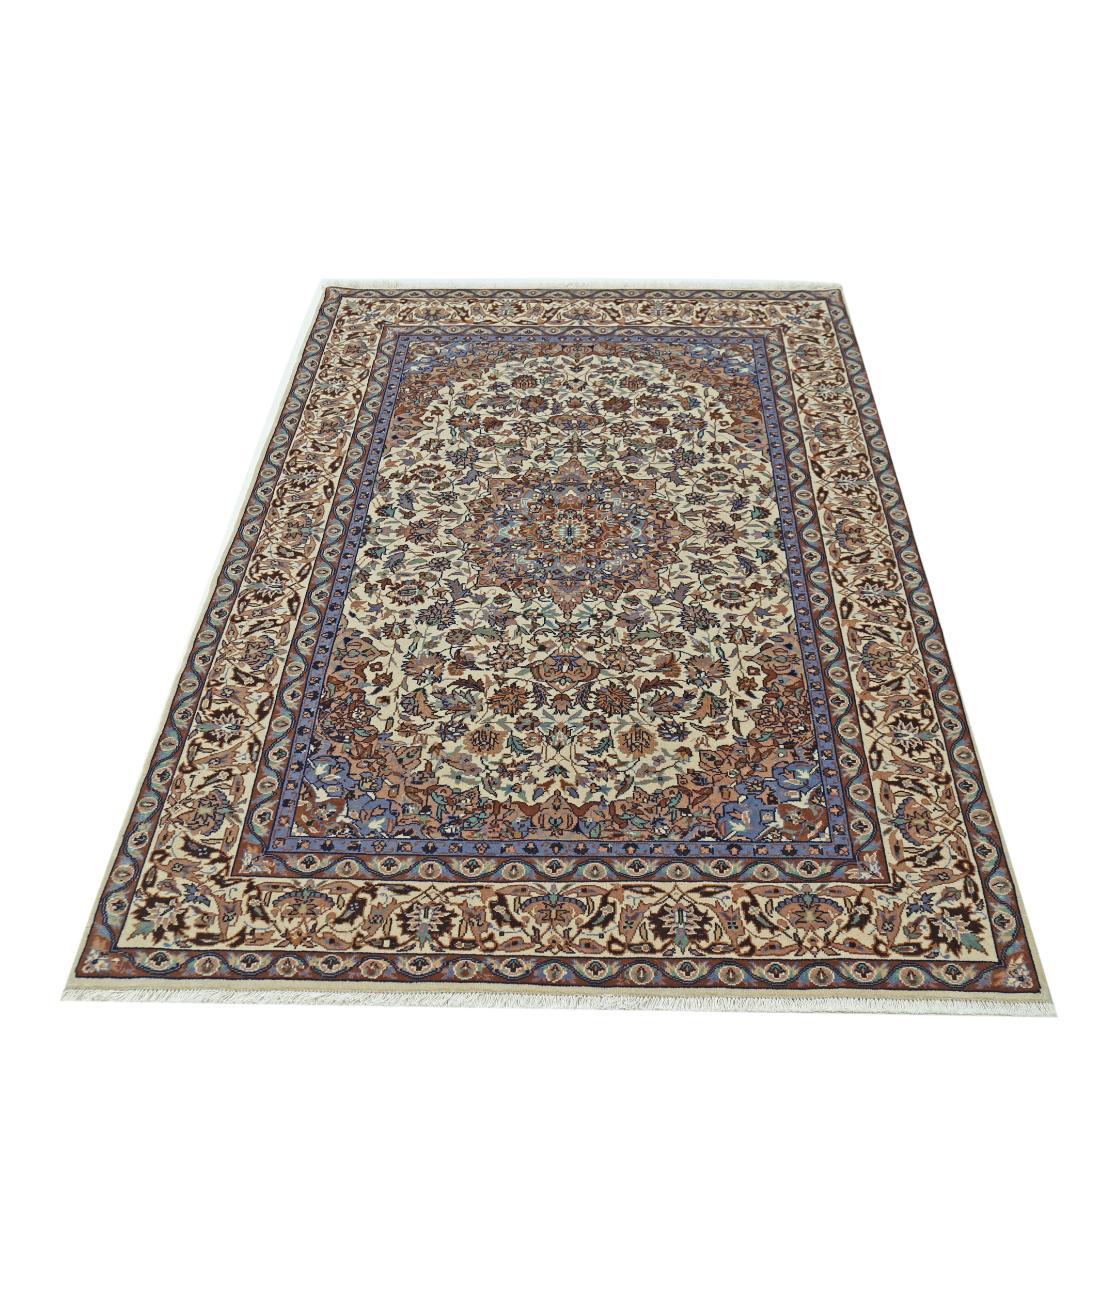 Heritage 4' 0" X 5' 11" Hand-Knotted Wool Rug 4' 0" X 5' 11" (122 X 180) / Ivory / Taupe